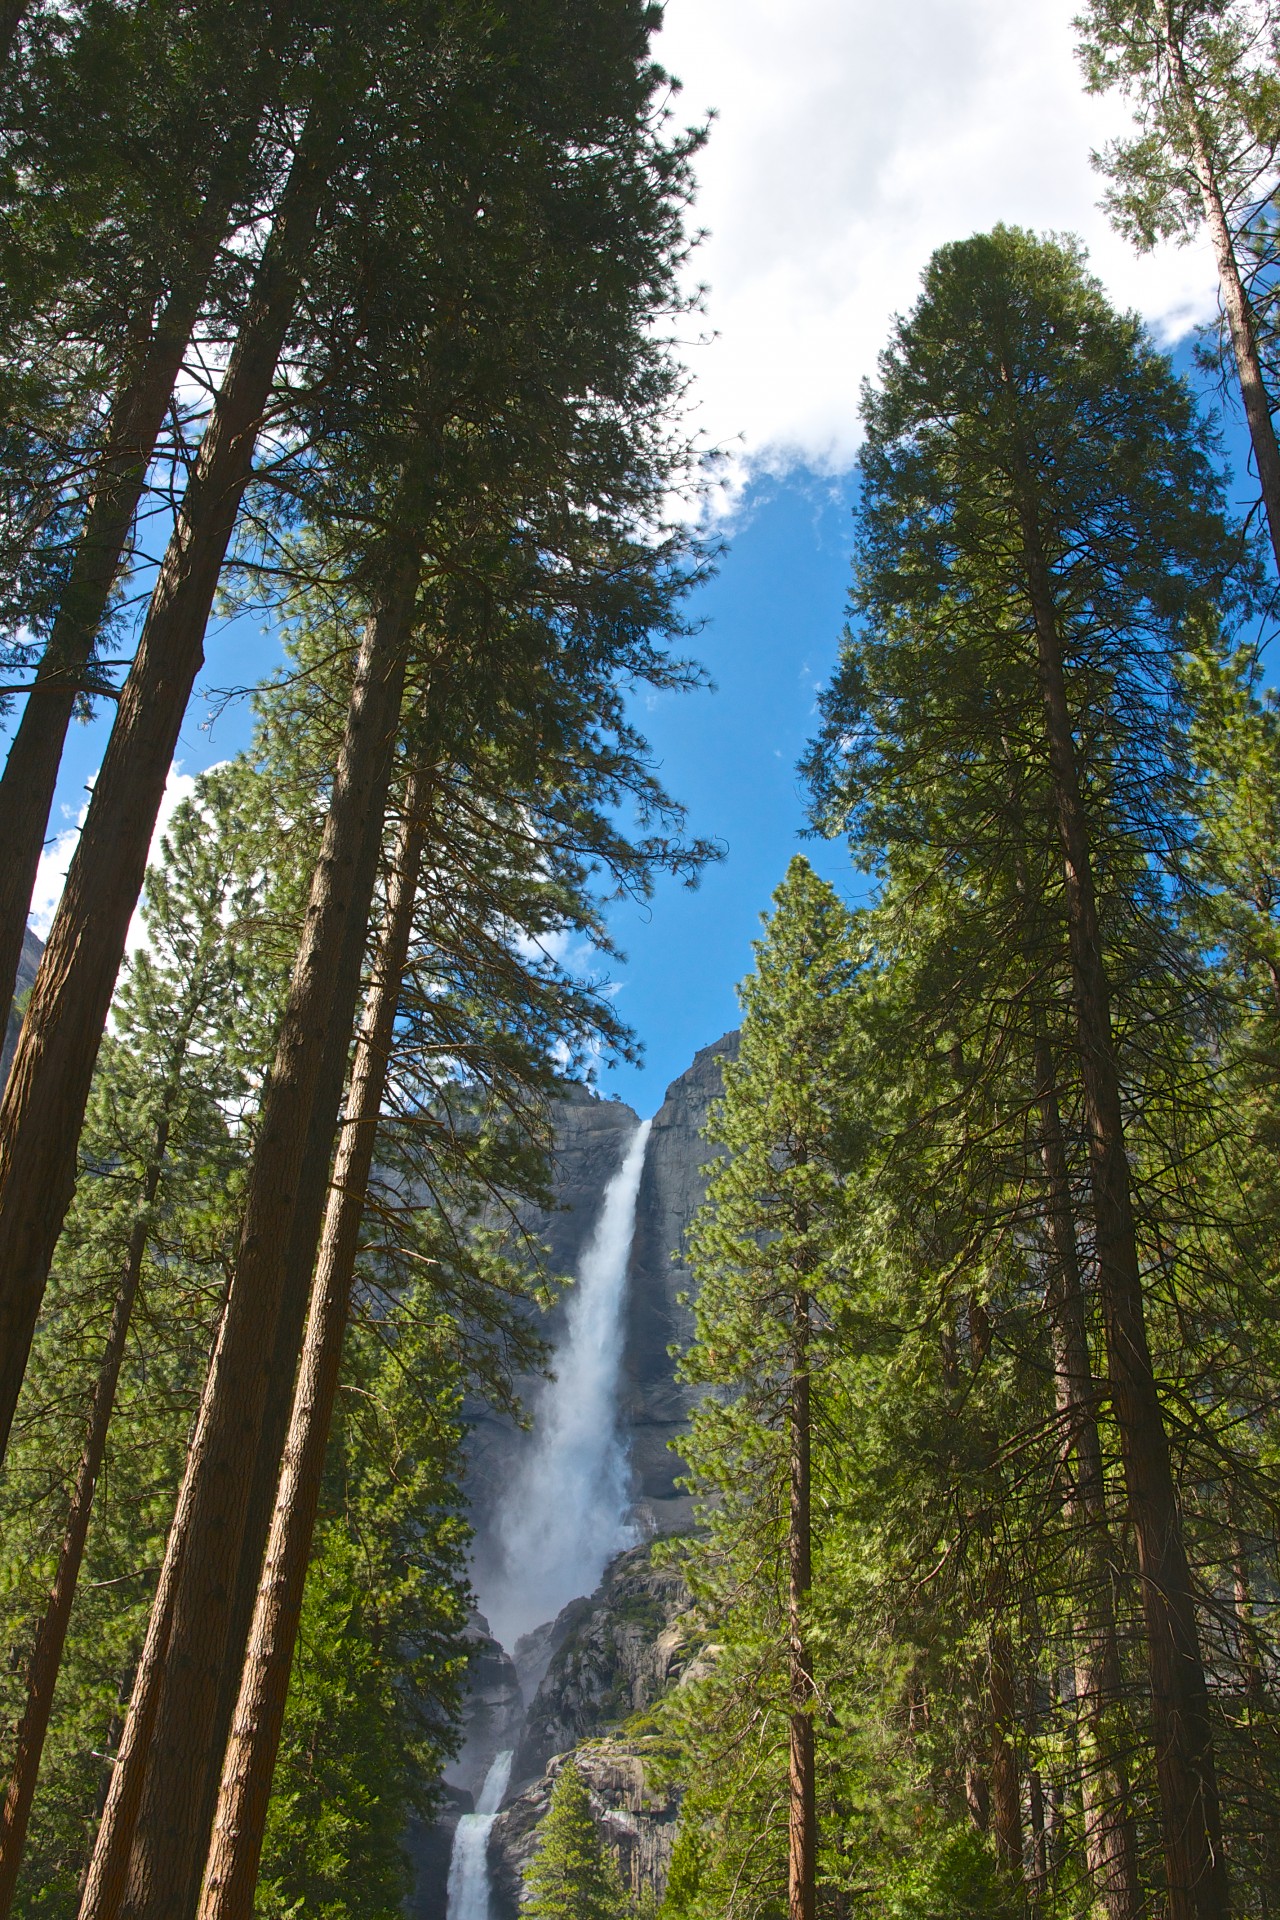 View of Upper Yosemite Falls seen from the forest floor of the National Park.